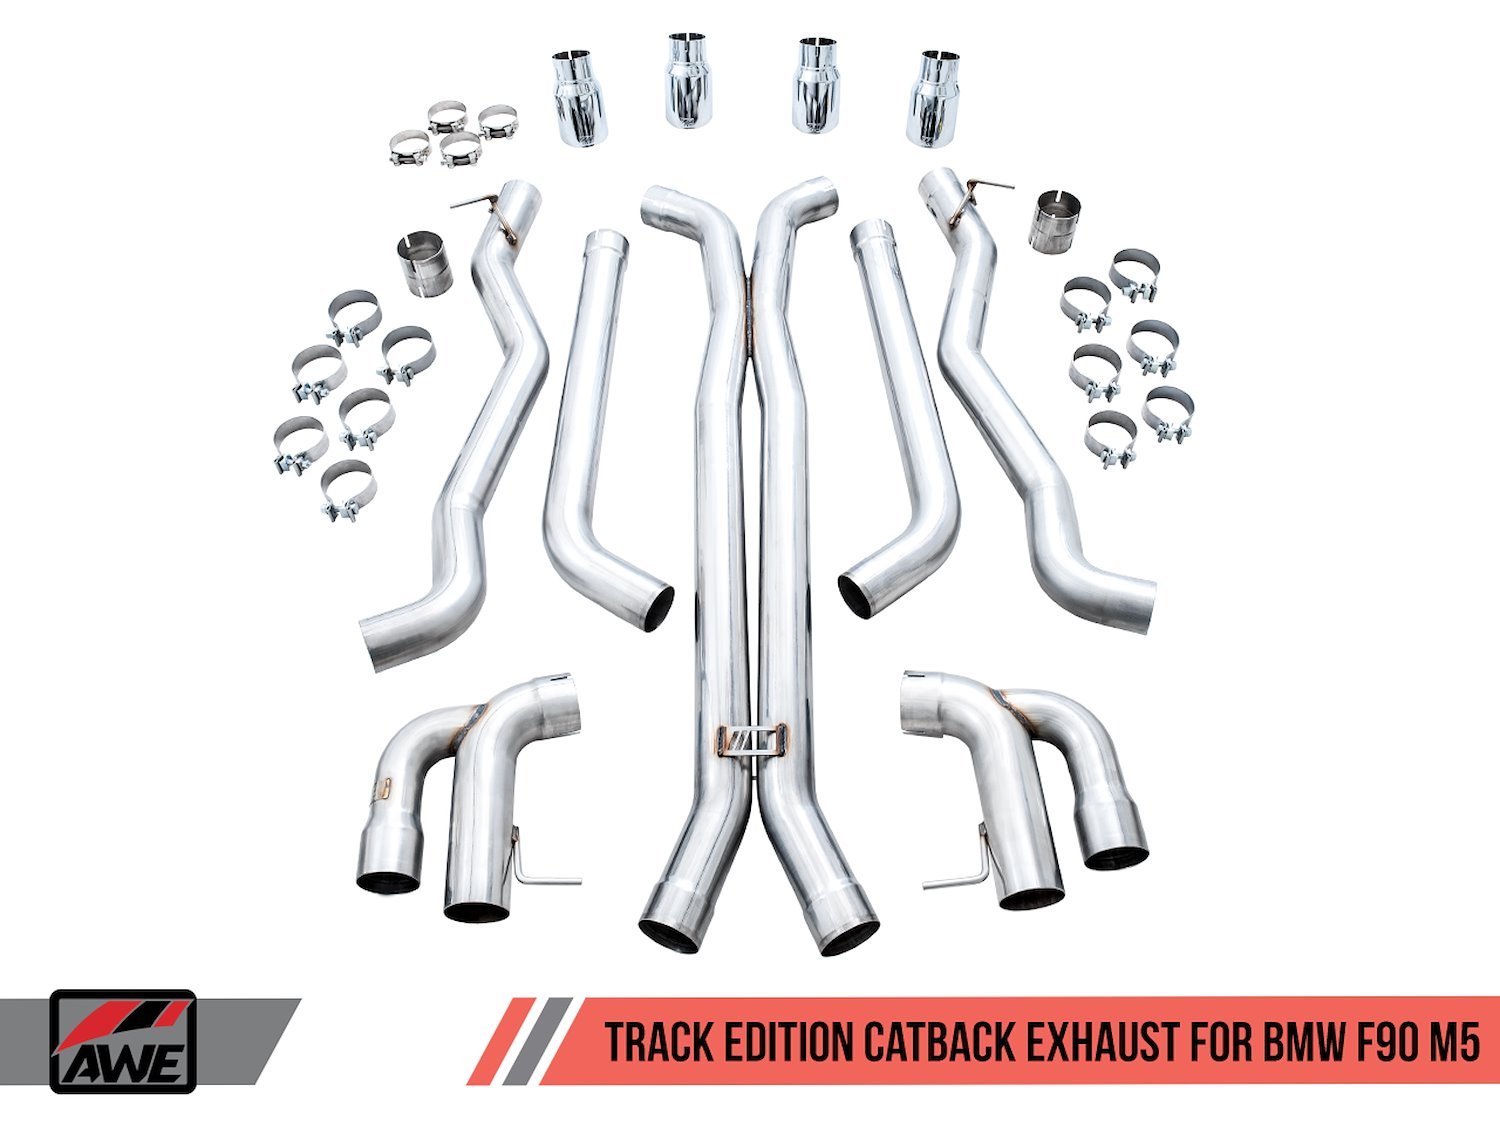 AWE Track Edition Axle-back Exhaust for BMW F90 M5 - Chrome Silver Tips